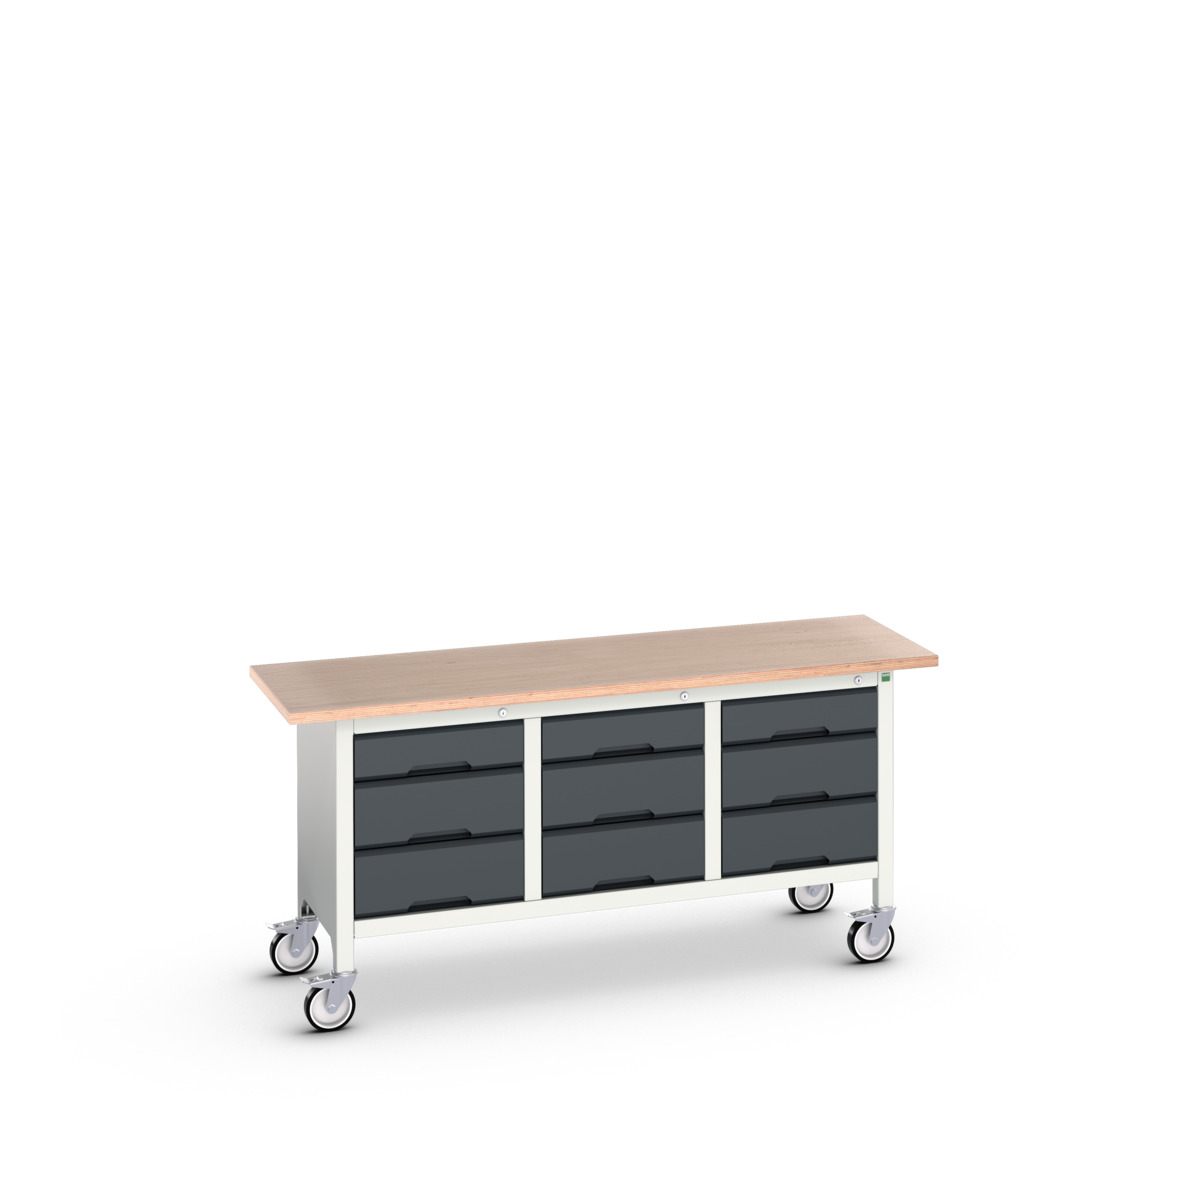 16923223. - verso mobile storage bench (mpx)